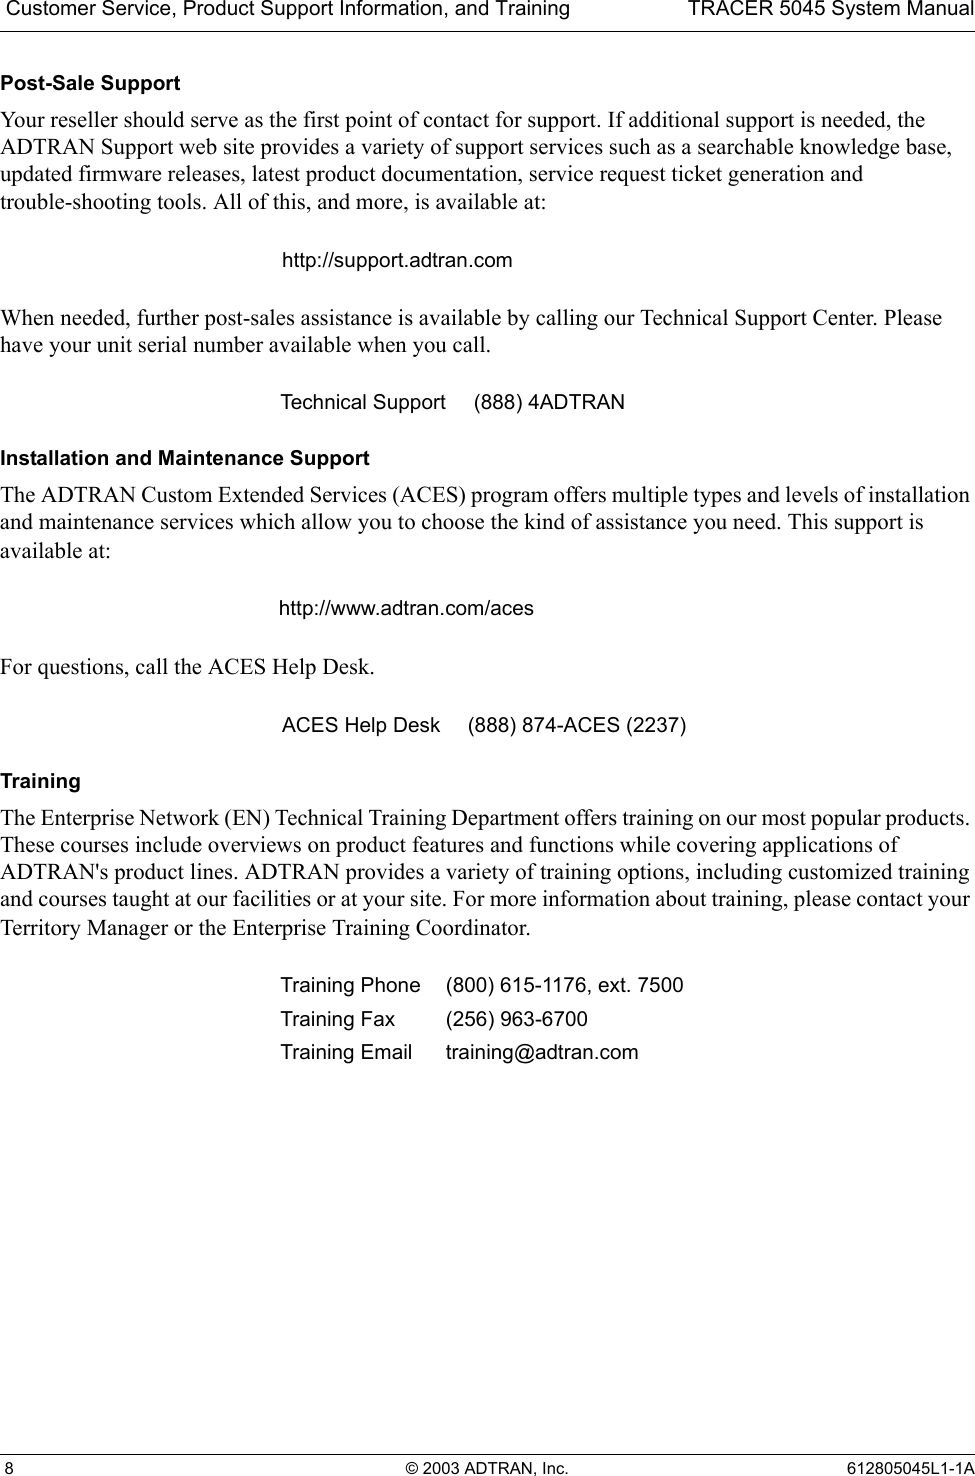  Customer Service, Product Support Information, and Training TRACER 5045 System Manual 8 © 2003 ADTRAN, Inc. 612805045L1-1APost-Sale SupportYour reseller should serve as the first point of contact for support. If additional support is needed, the ADTRAN Support web site provides a variety of support services such as a searchable knowledge base, updated firmware releases, latest product documentation, service request ticket generation and trouble-shooting tools. All of this, and more, is available at:When needed, further post-sales assistance is available by calling our Technical Support Center. Please have your unit serial number available when you call.Installation and Maintenance SupportThe ADTRAN Custom Extended Services (ACES) program offers multiple types and levels of installation and maintenance services which allow you to choose the kind of assistance you need. This support is available at:For questions, call the ACES Help Desk. TrainingThe Enterprise Network (EN) Technical Training Department offers training on our most popular products. These courses include overviews on product features and functions while covering applications of ADTRAN&apos;s product lines. ADTRAN provides a variety of training options, including customized training and courses taught at our facilities or at your site. For more information about training, please contact your Territory Manager or the Enterprise Training Coordinator.http://support.adtran.comTechnical Support (888) 4ADTRANhttp://www.adtran.com/acesACES Help Desk (888) 874-ACES (2237) Training Phone (800) 615-1176, ext. 7500 Training Fax (256) 963-6700Training Email training@adtran.com